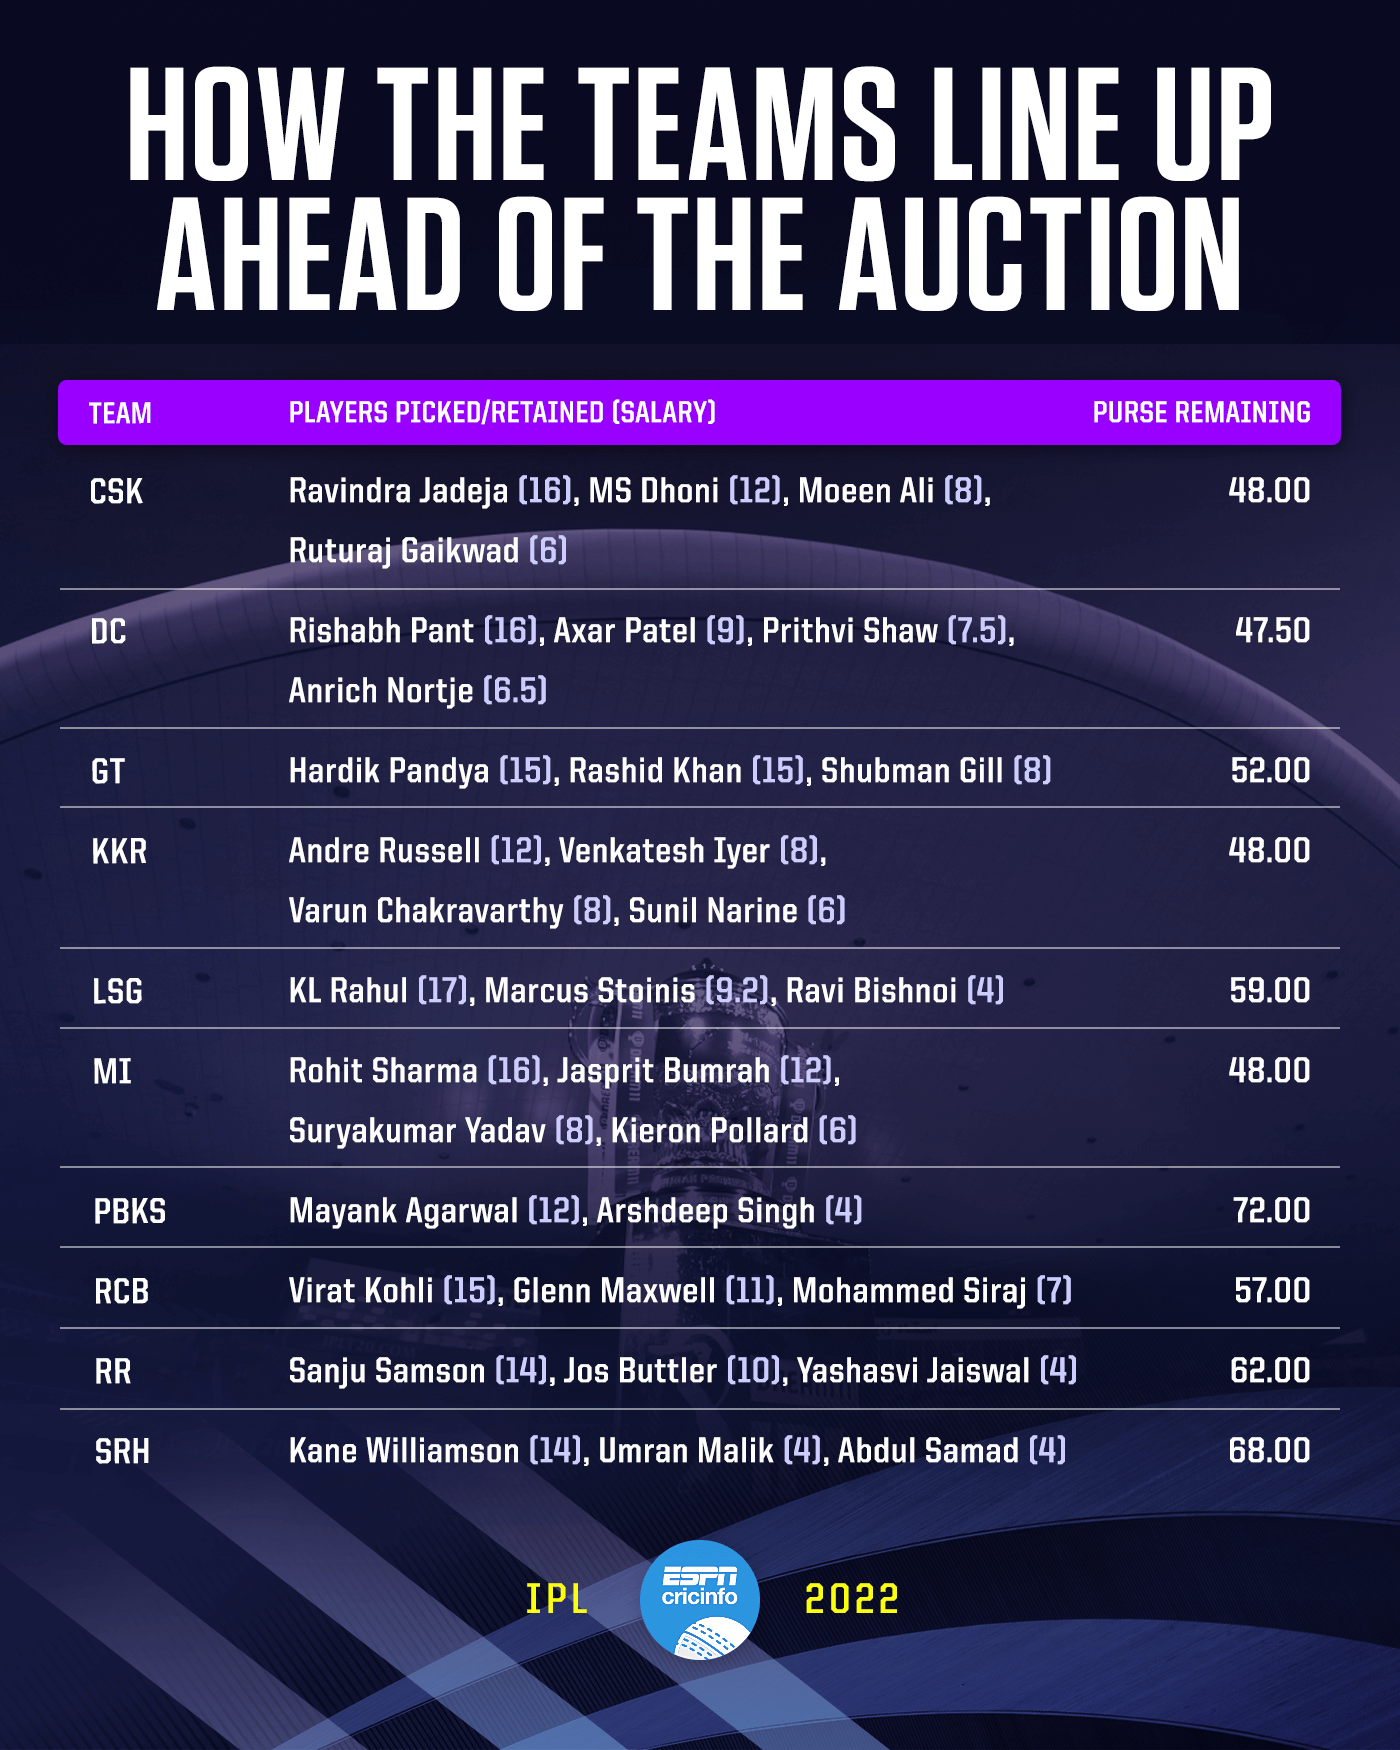 Ipl Schedule For 2022 Faqs - All You Wanted To Know About The Ipl 2022 Auction